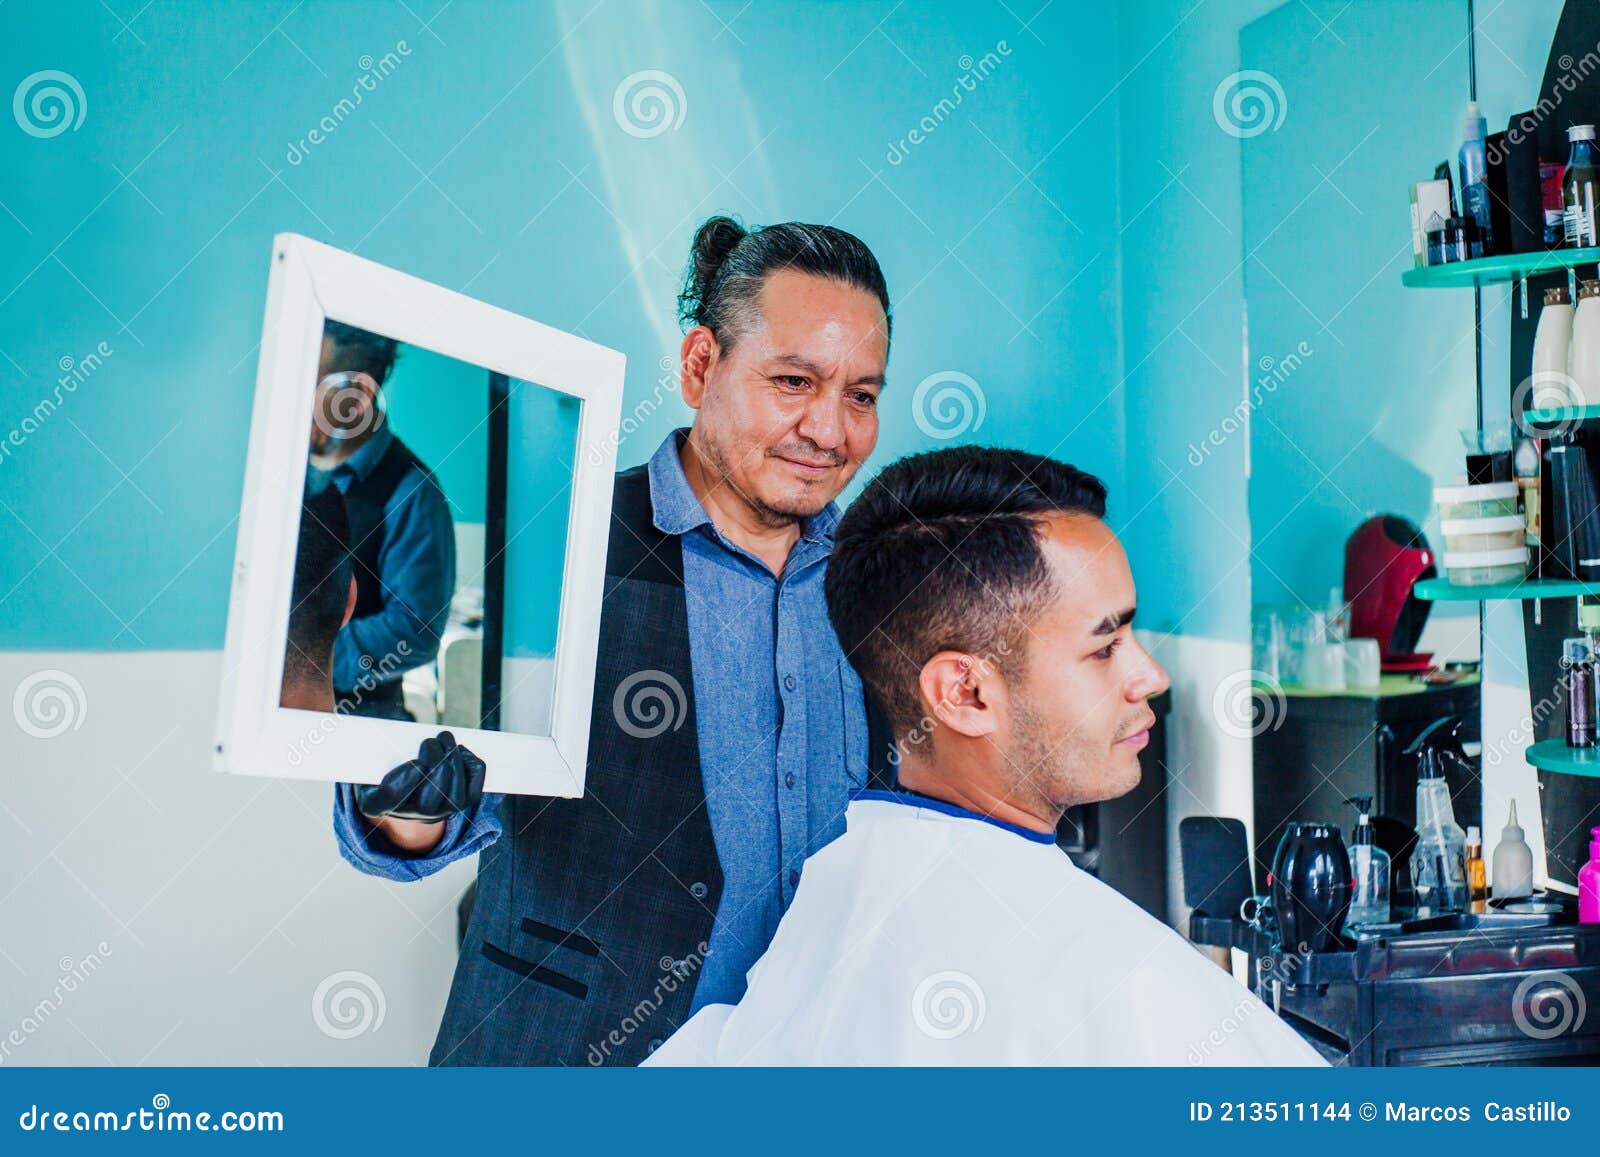 latin man stylist cutting hair to a client and holding a mirror in a barber shop in mexico